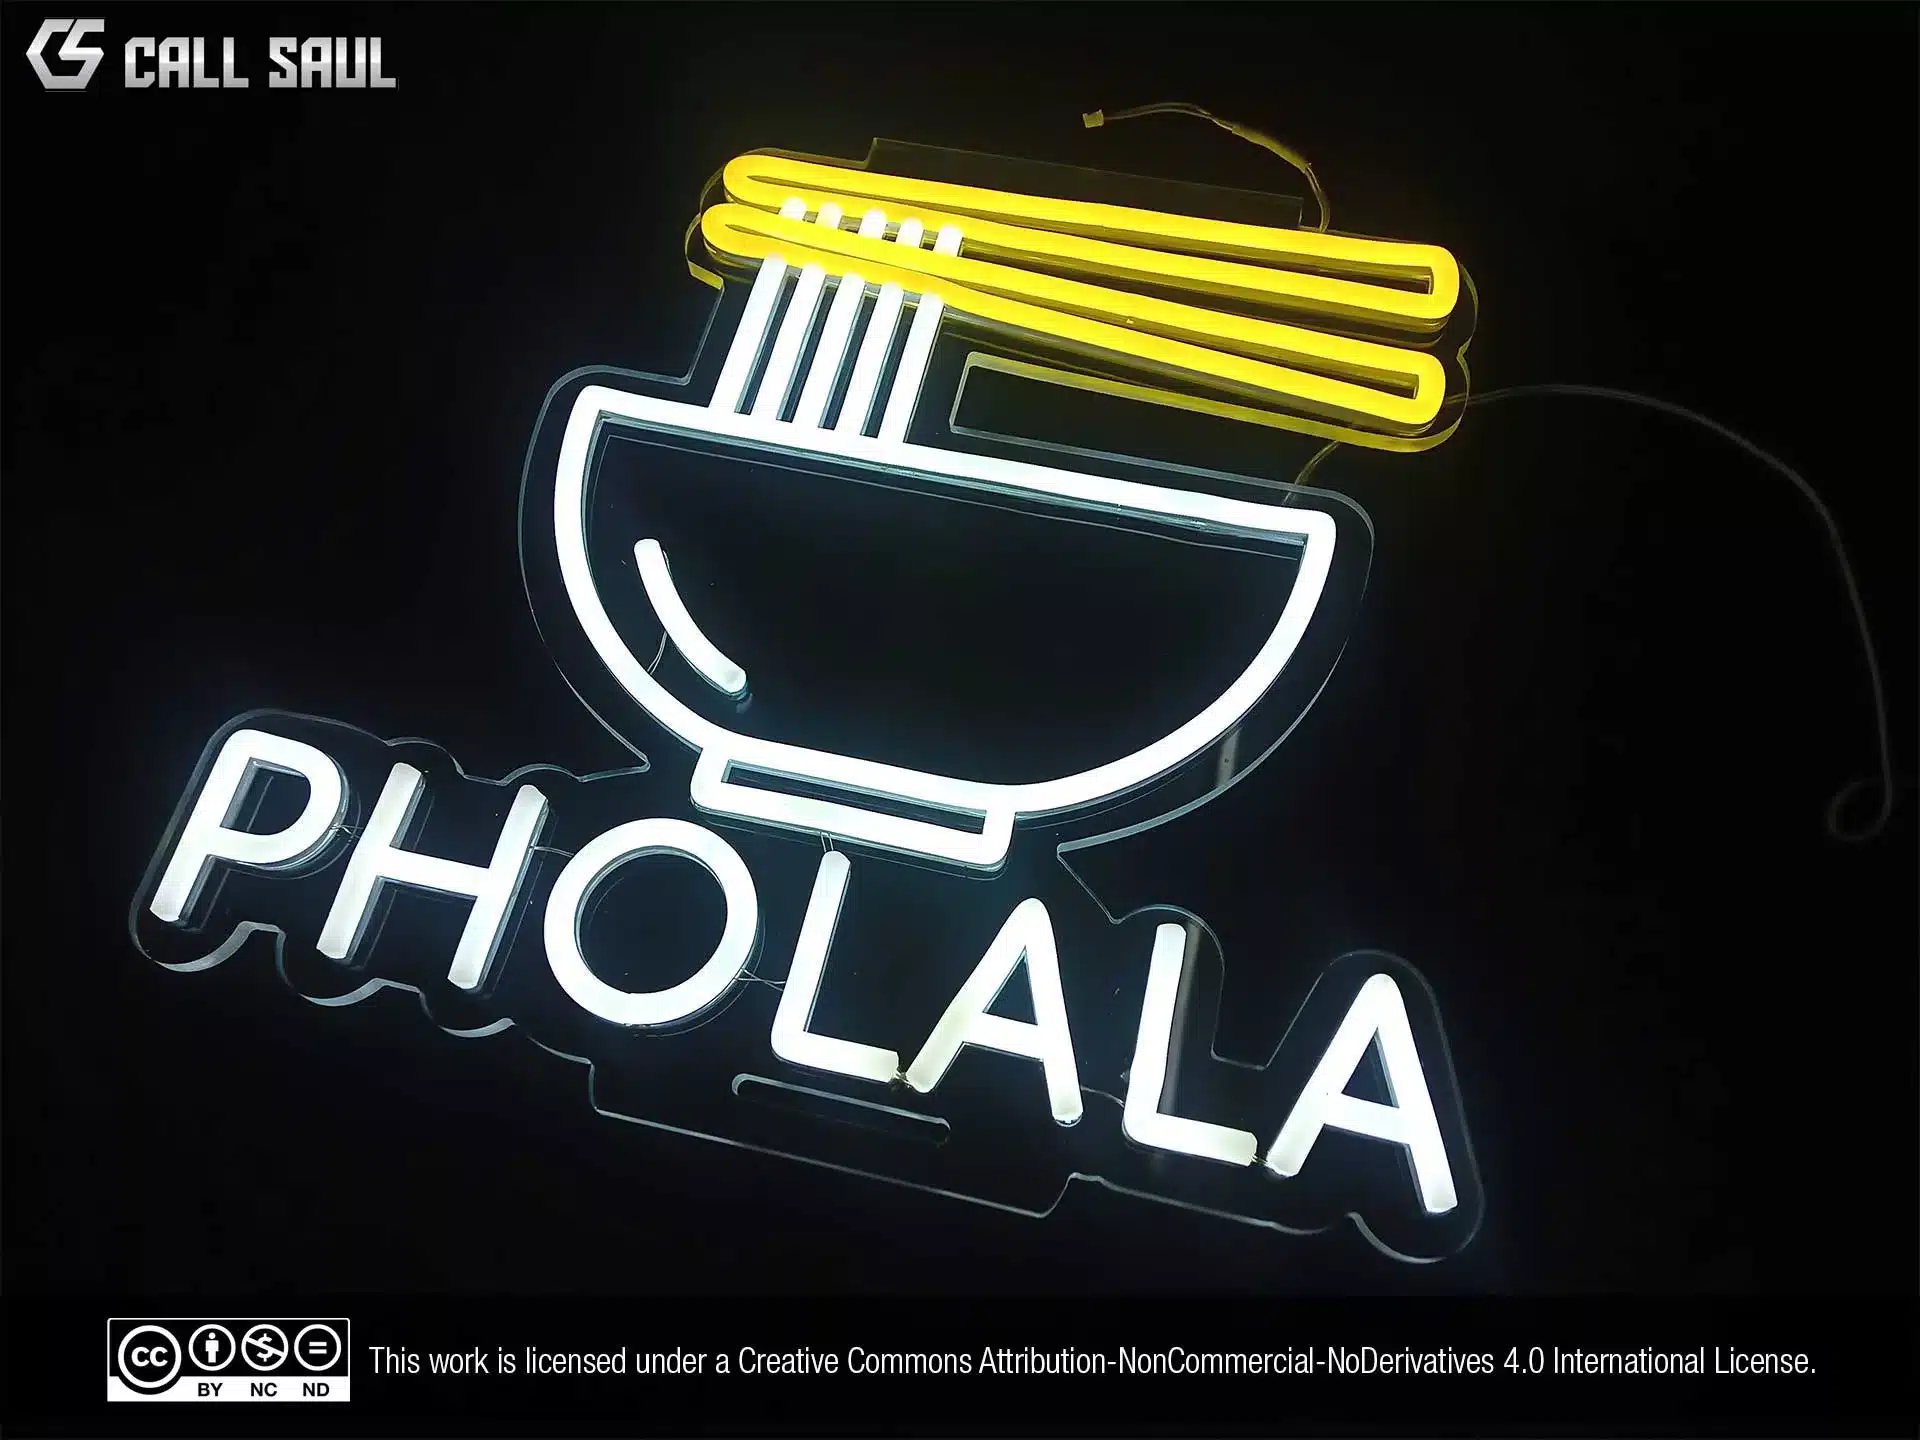 The Eating Factory Pholala Cool White and Golden Yellow Color LED Neon Sign